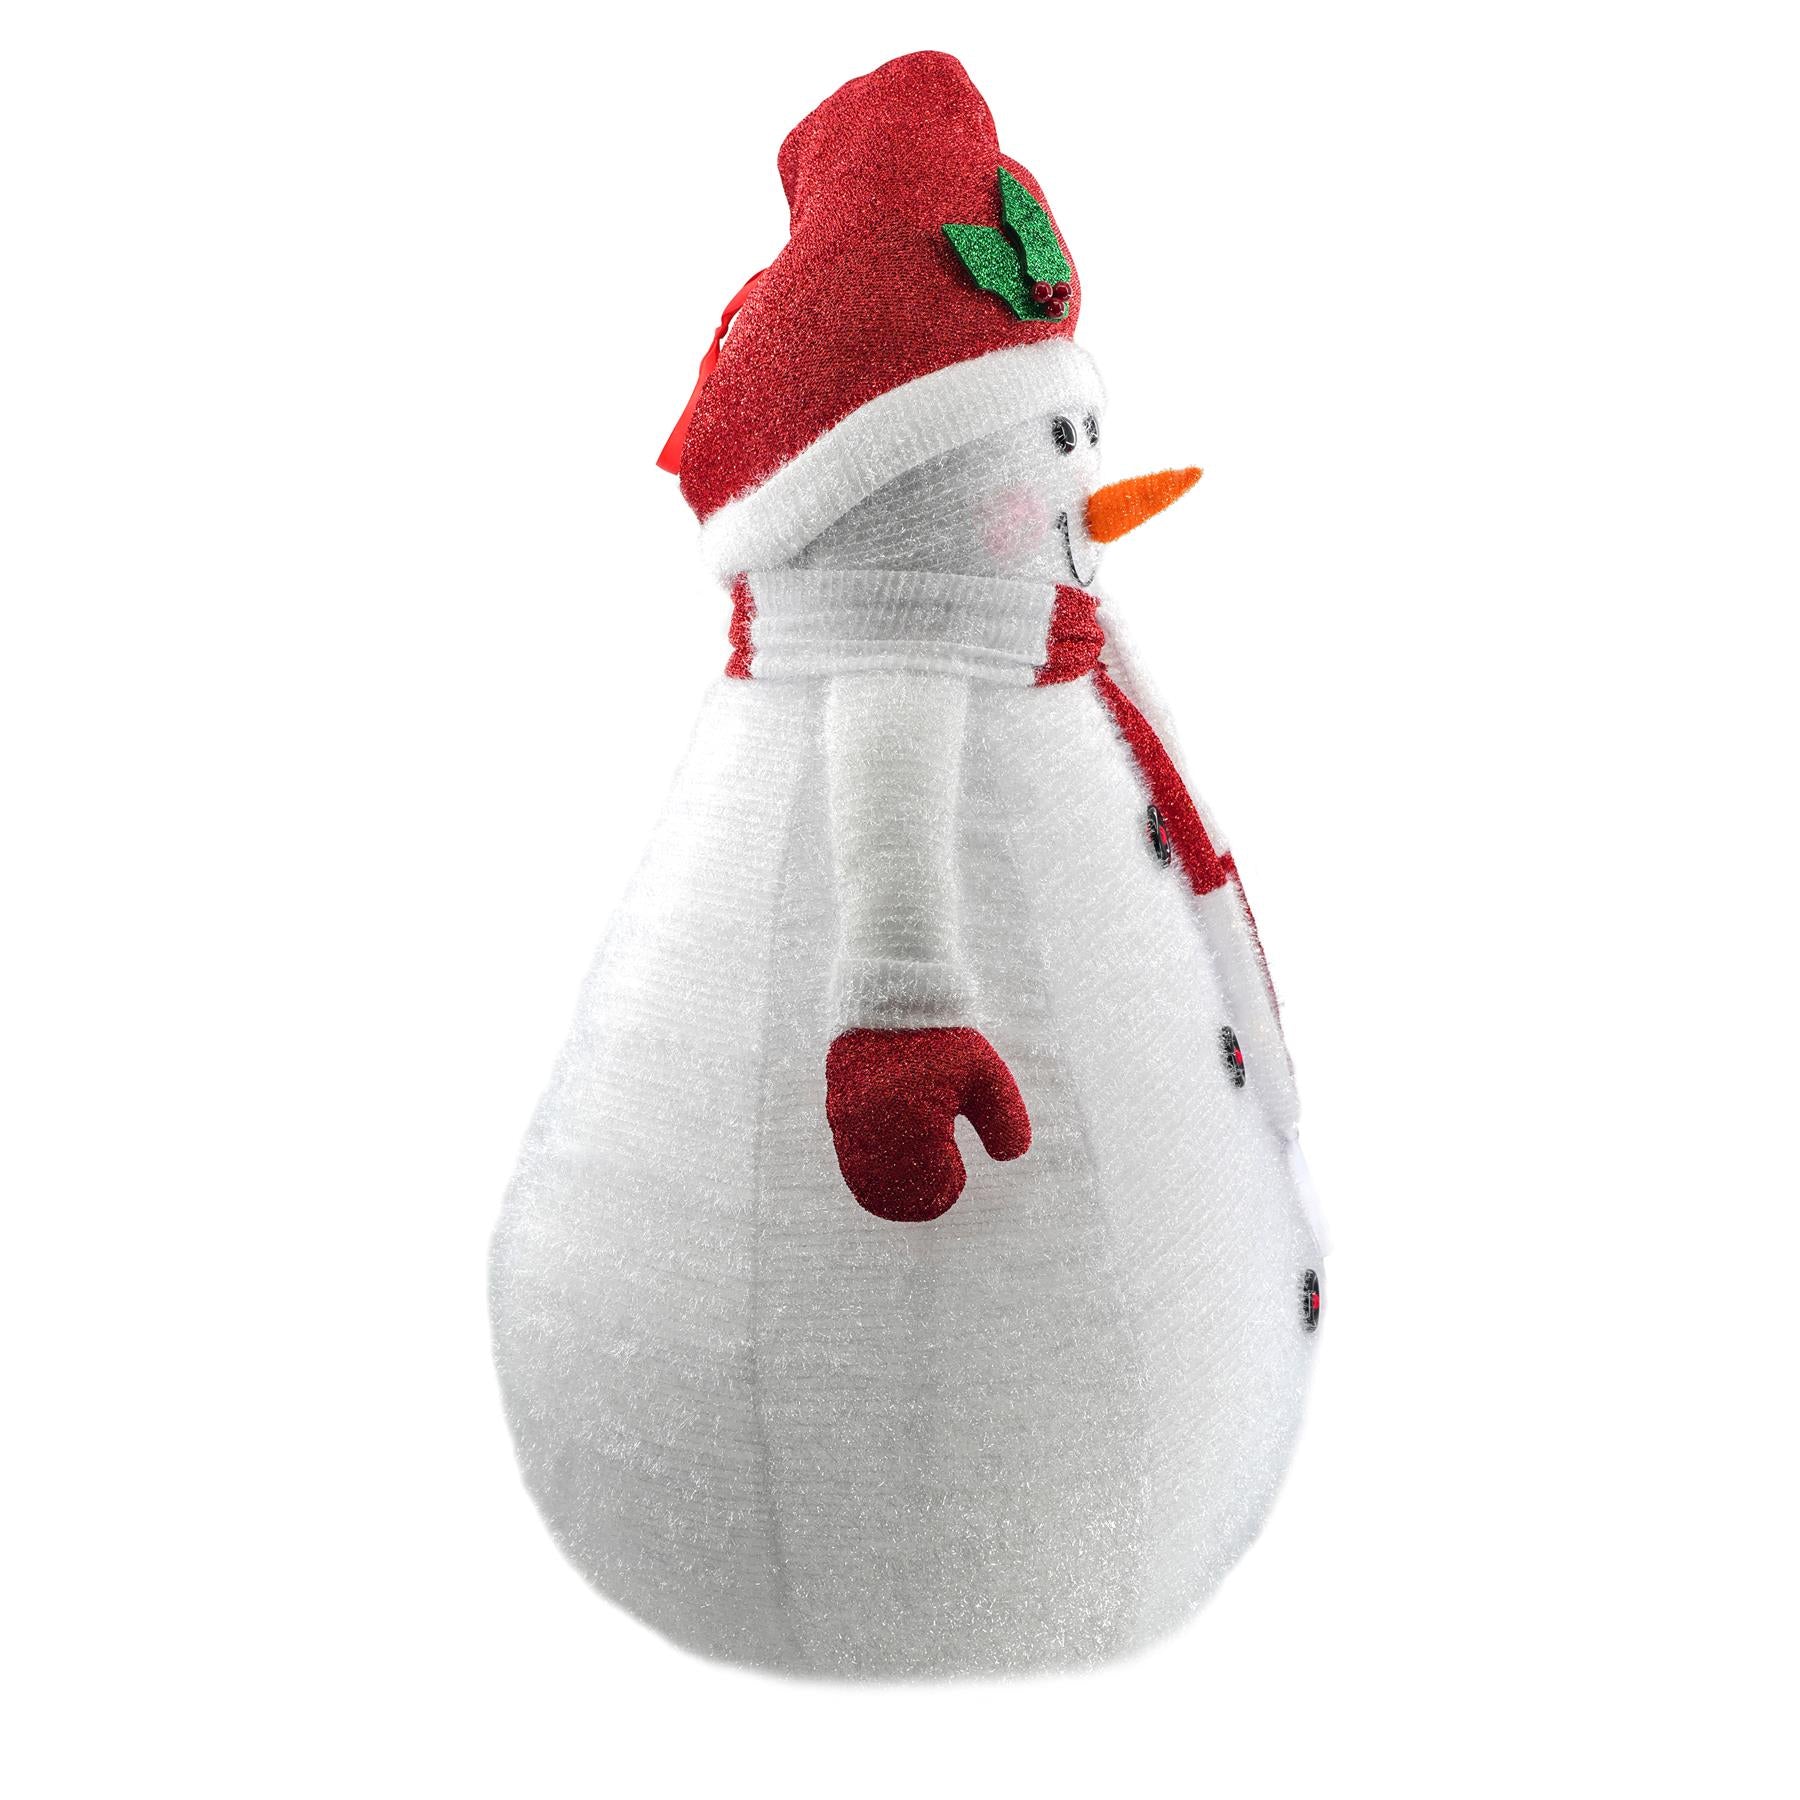 Collapsible Snowman Christmas Decoration with LED lights by The Magic Toy Shop - UKBuyZone